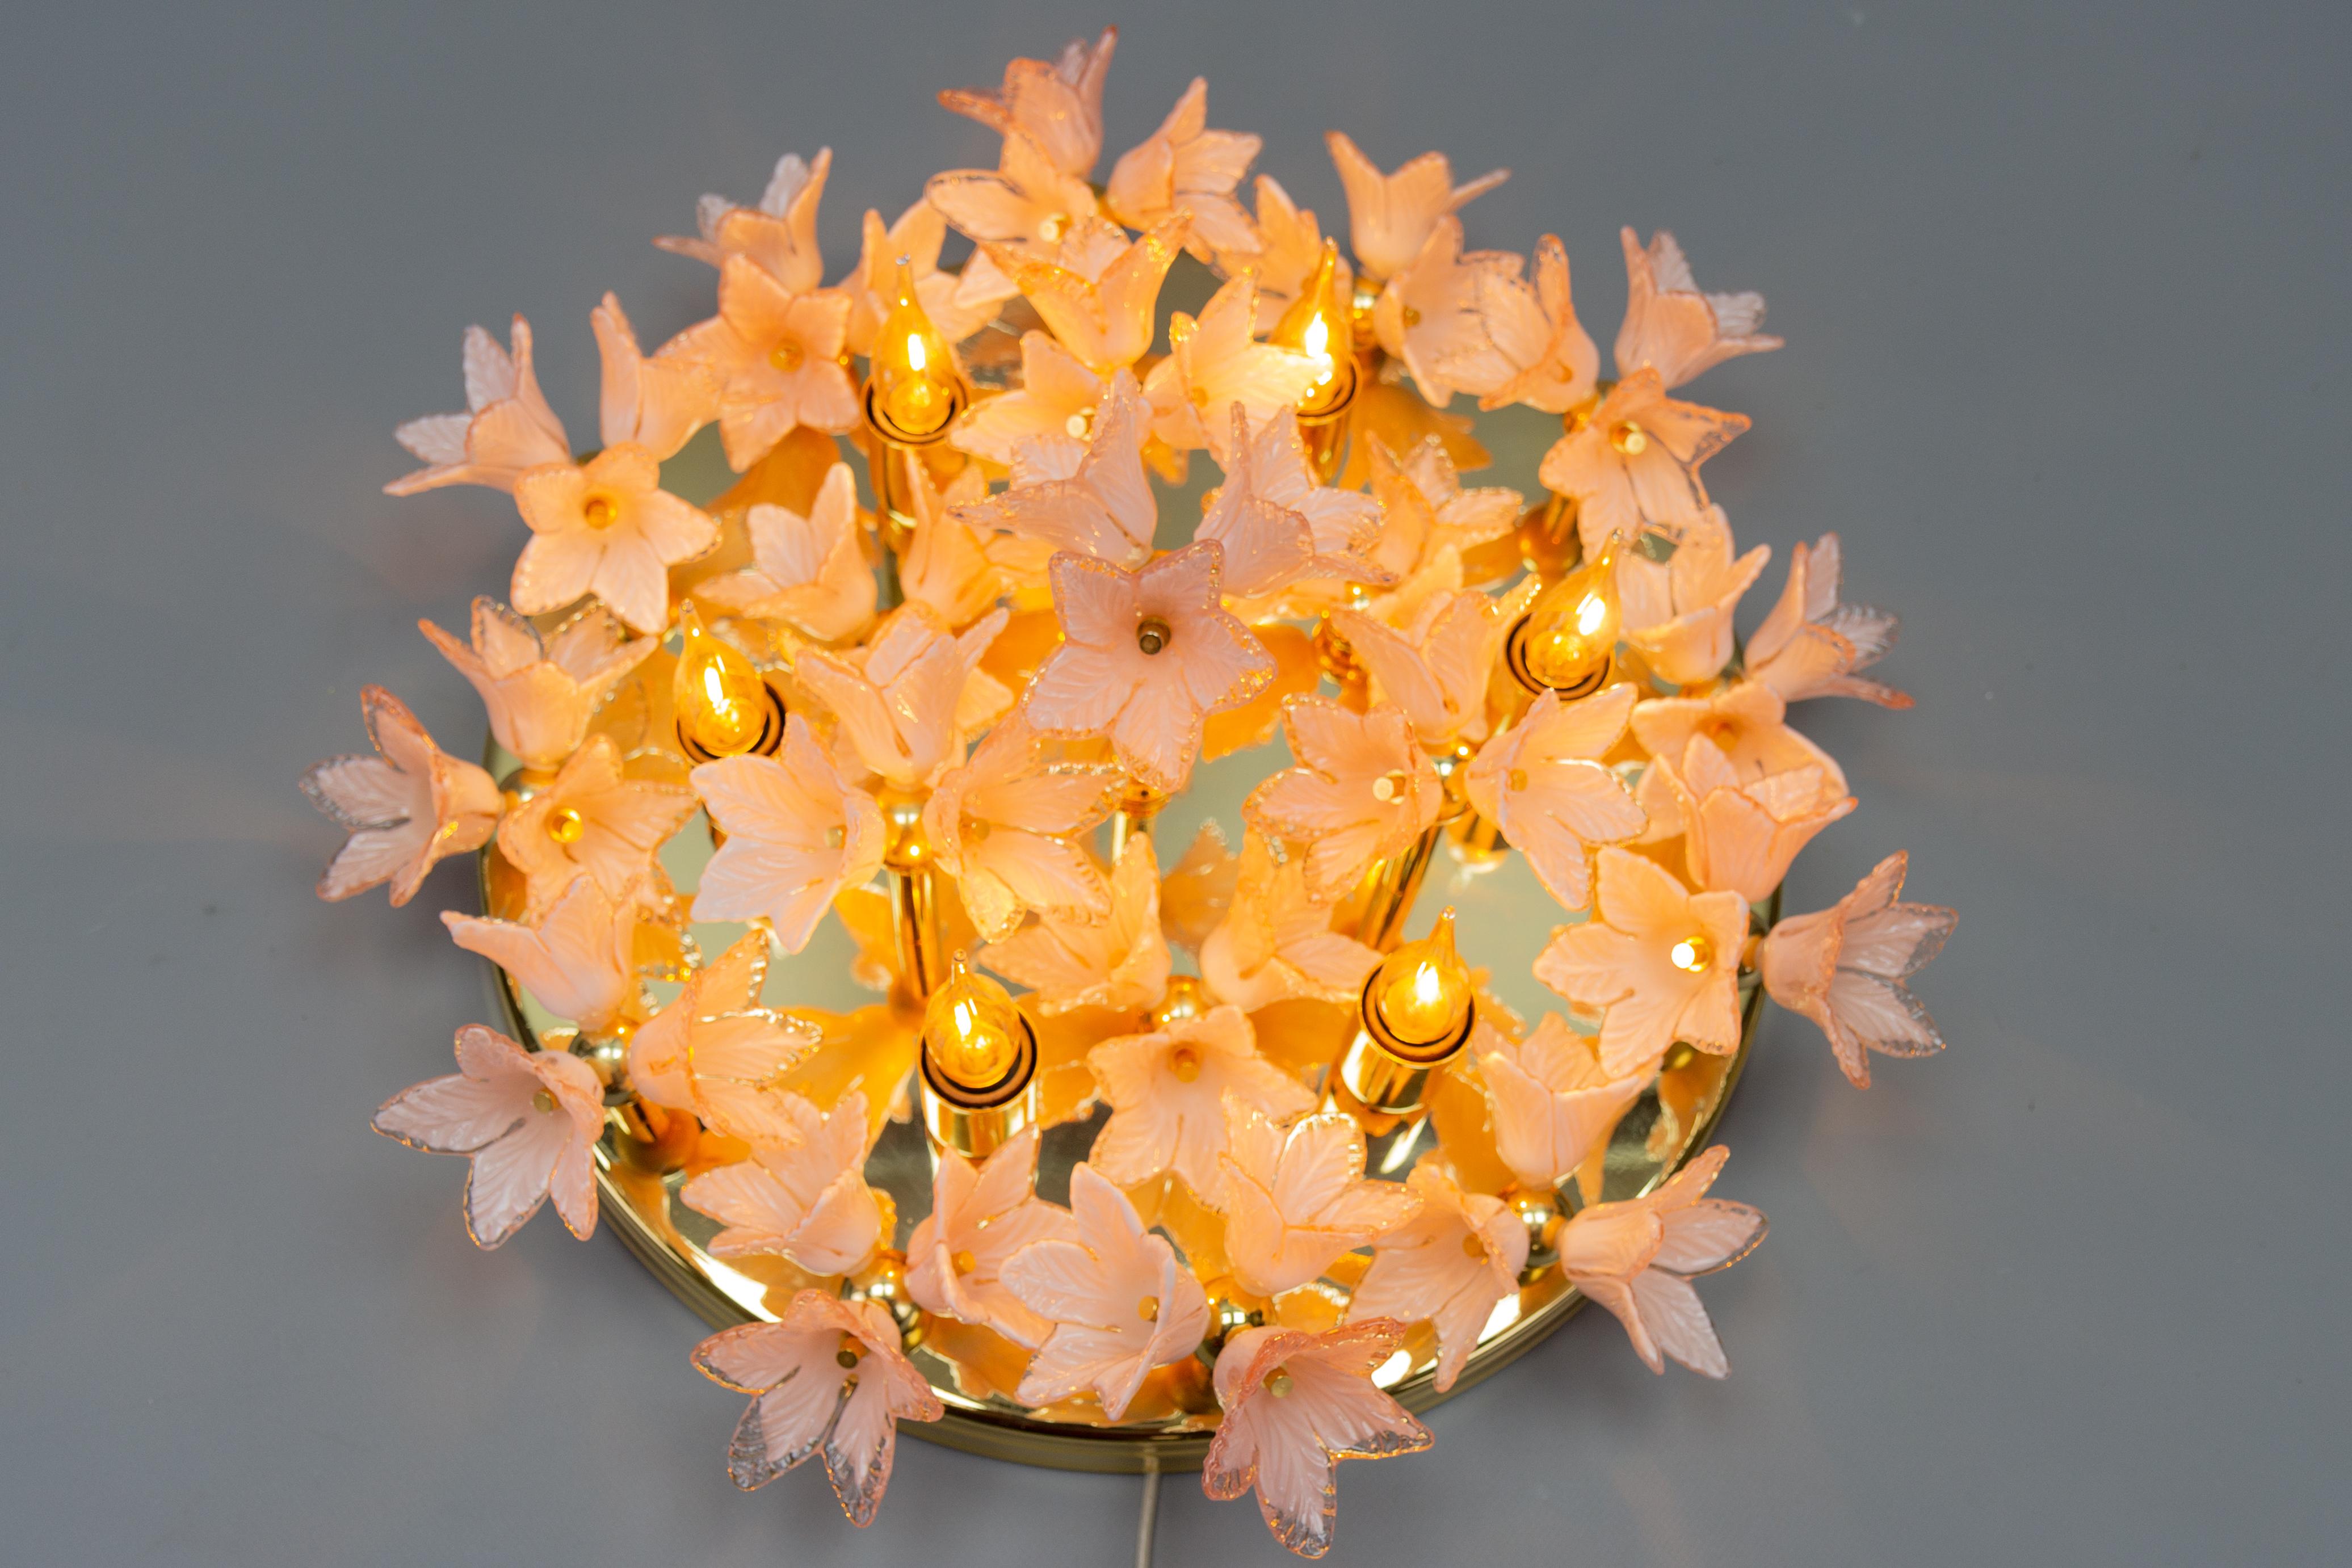 Italian Murano glass light pastel pink flowers and brass flush mount chandelier, circa the 1970s.
This stunning and large Murano glass six-light flush mount features 57 hand-crafted light pastel flowers, arranged in 19 bouquets of three mounted on a